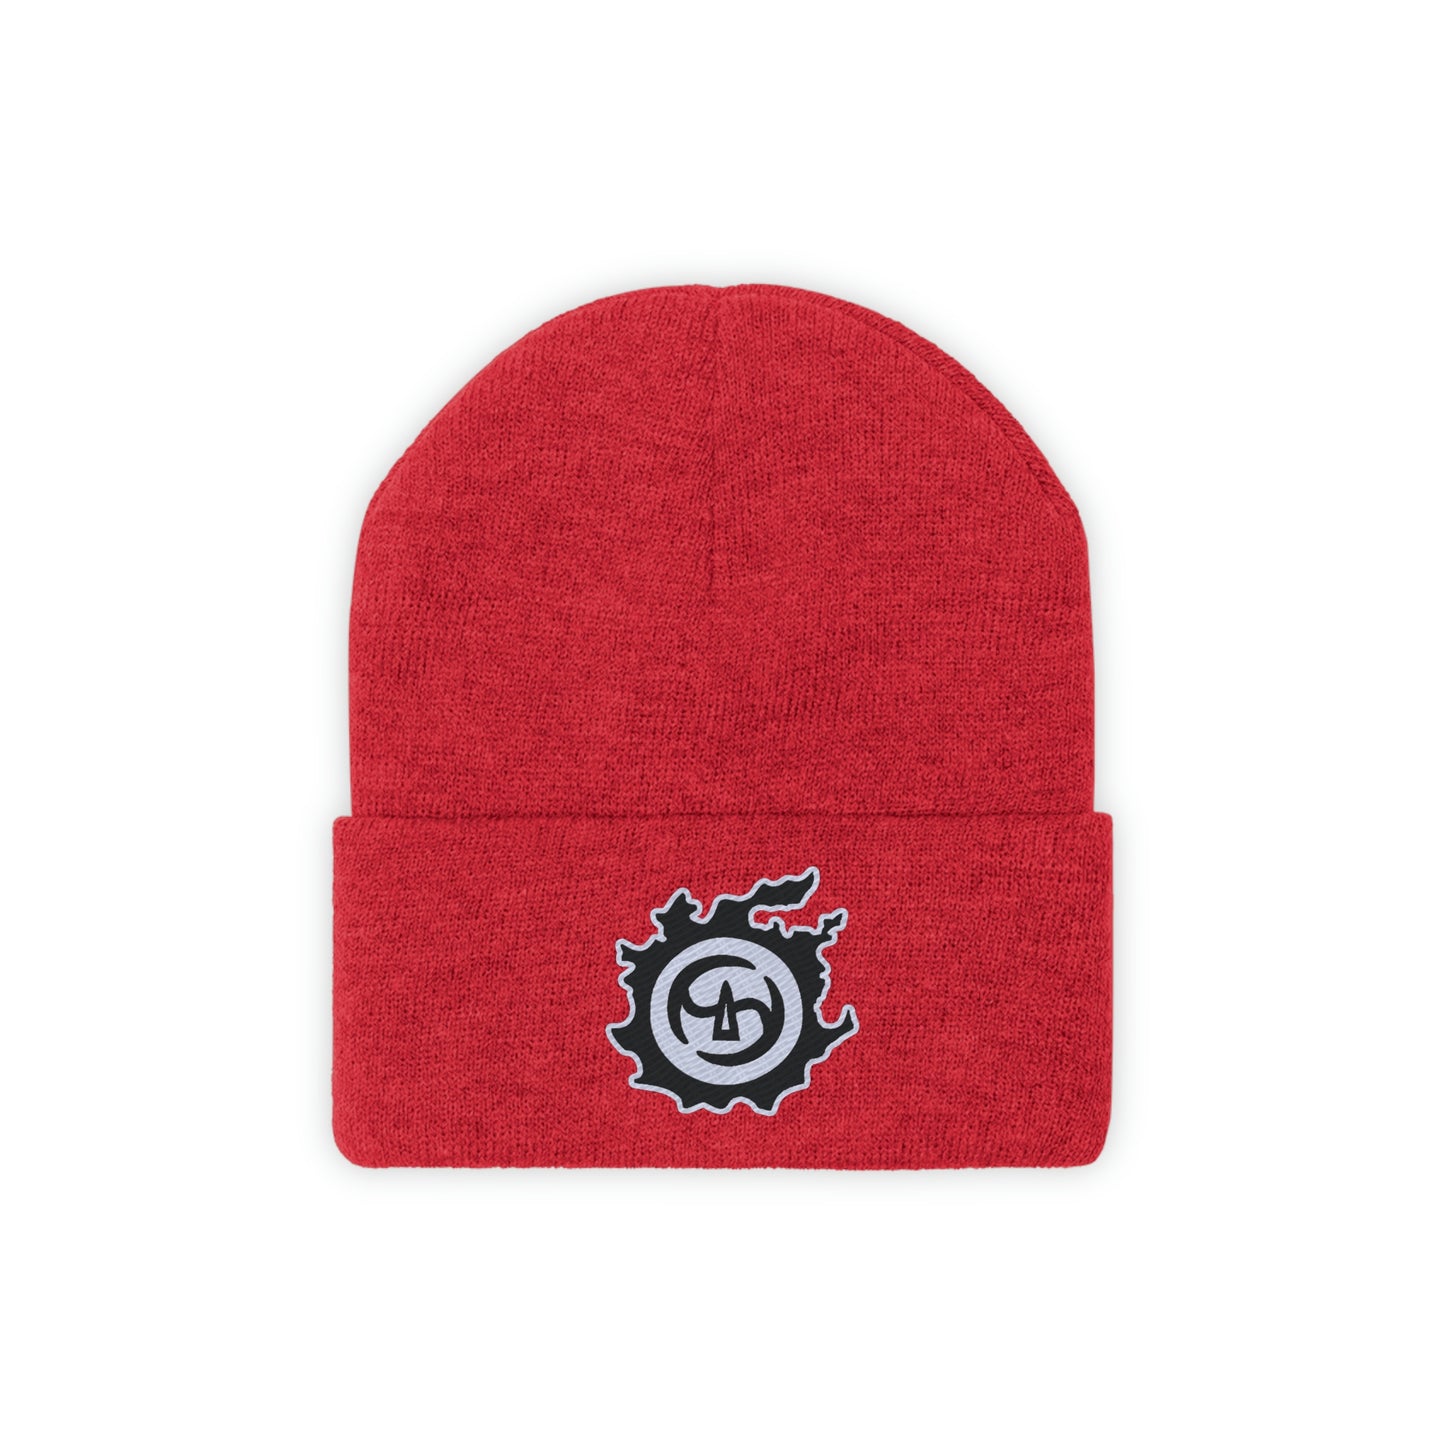 FF XIV SAM Job Icon Embroidered Beanie Embroiderry